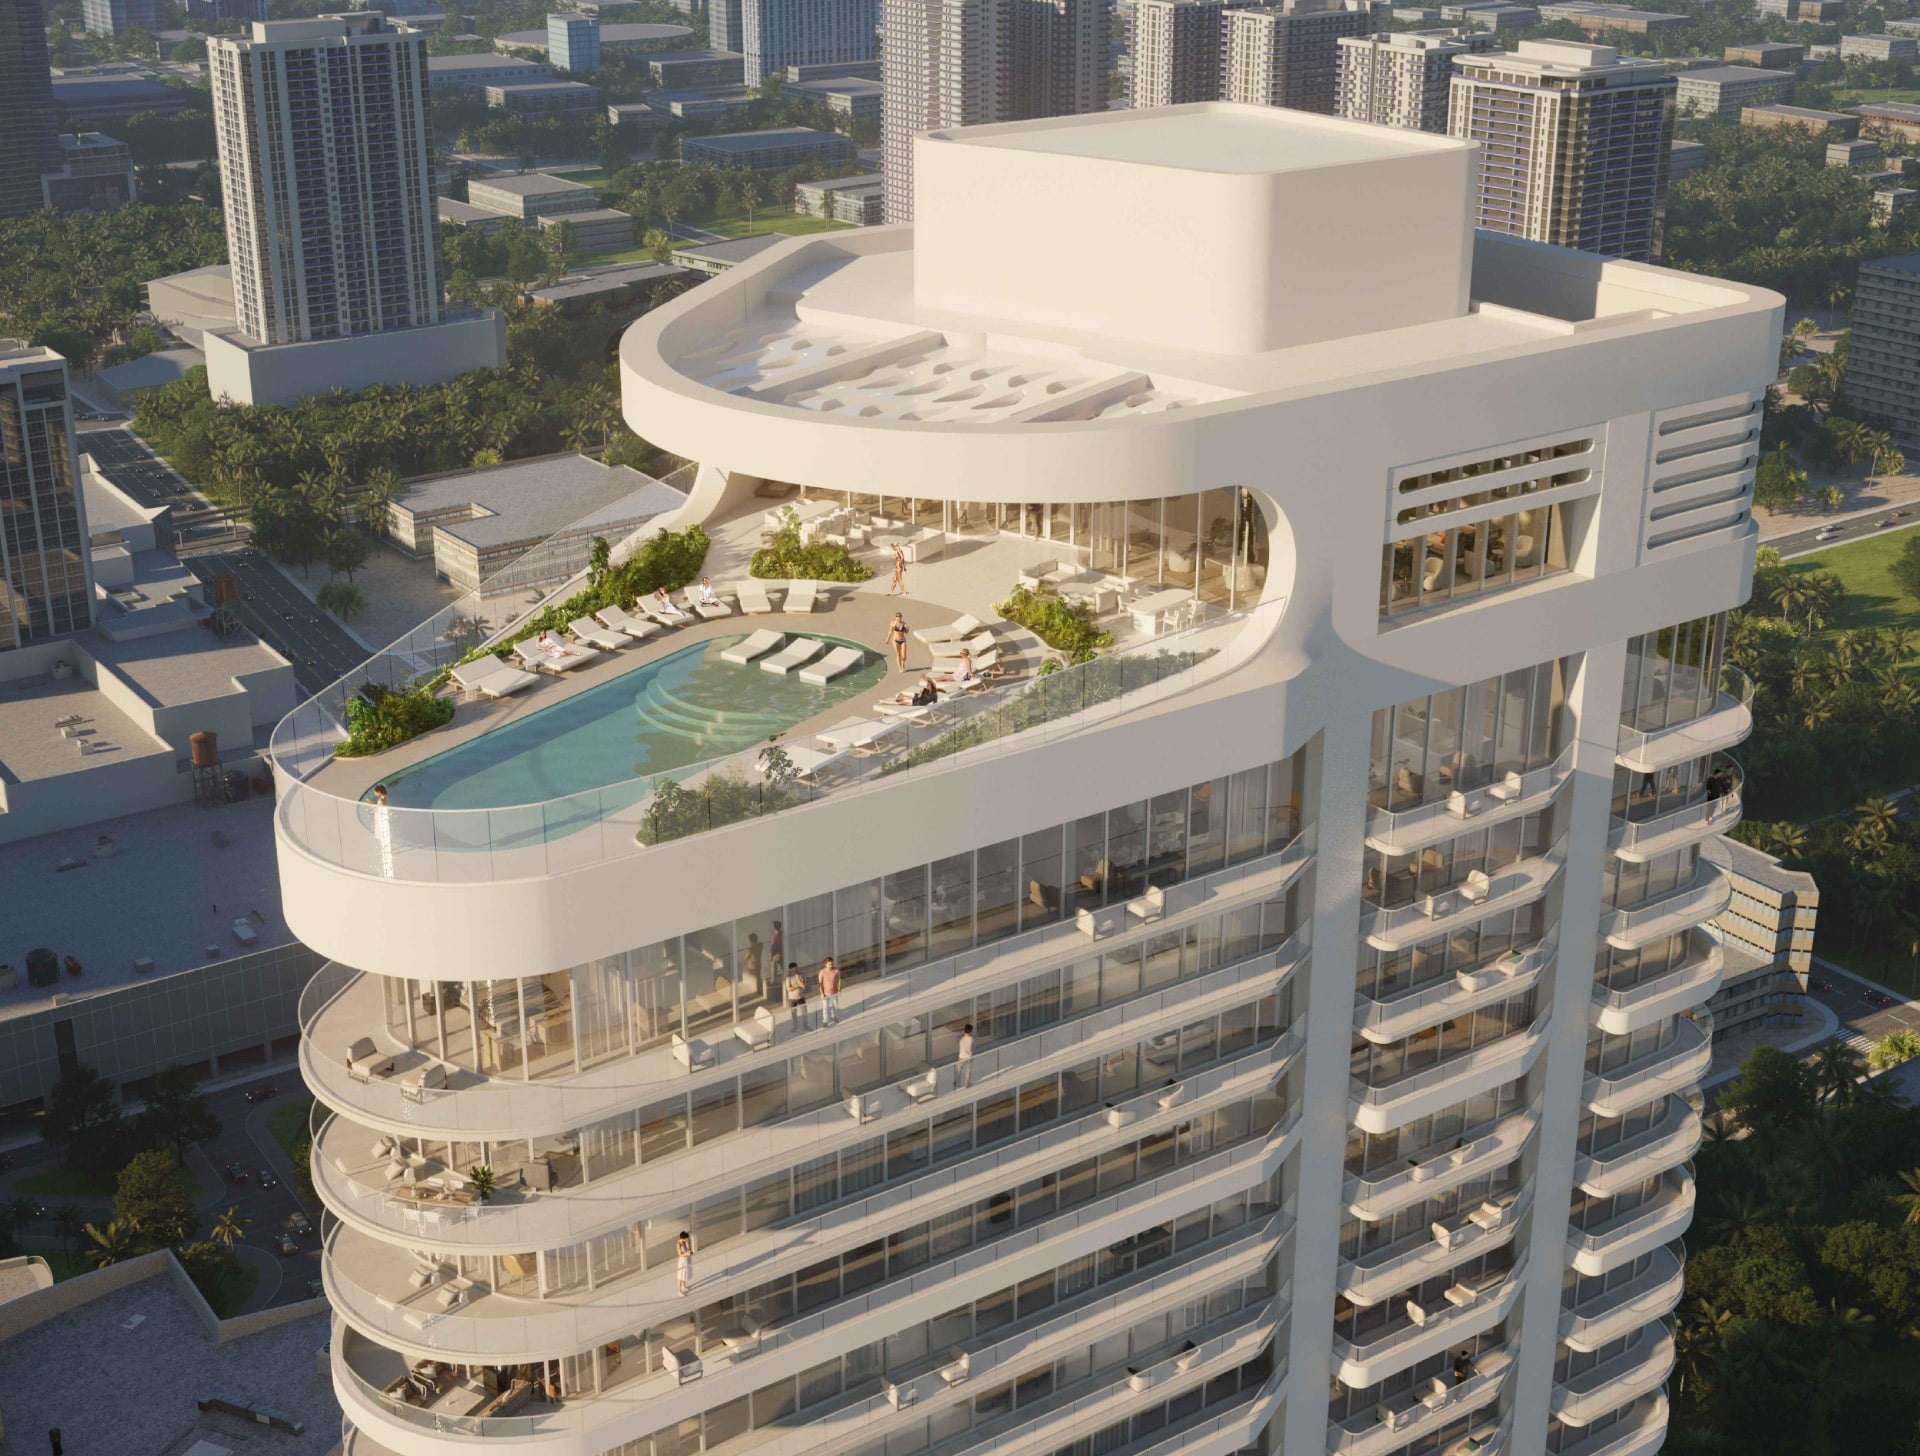 Revealed: 55-Story Residential Tower Planned In Edgewater